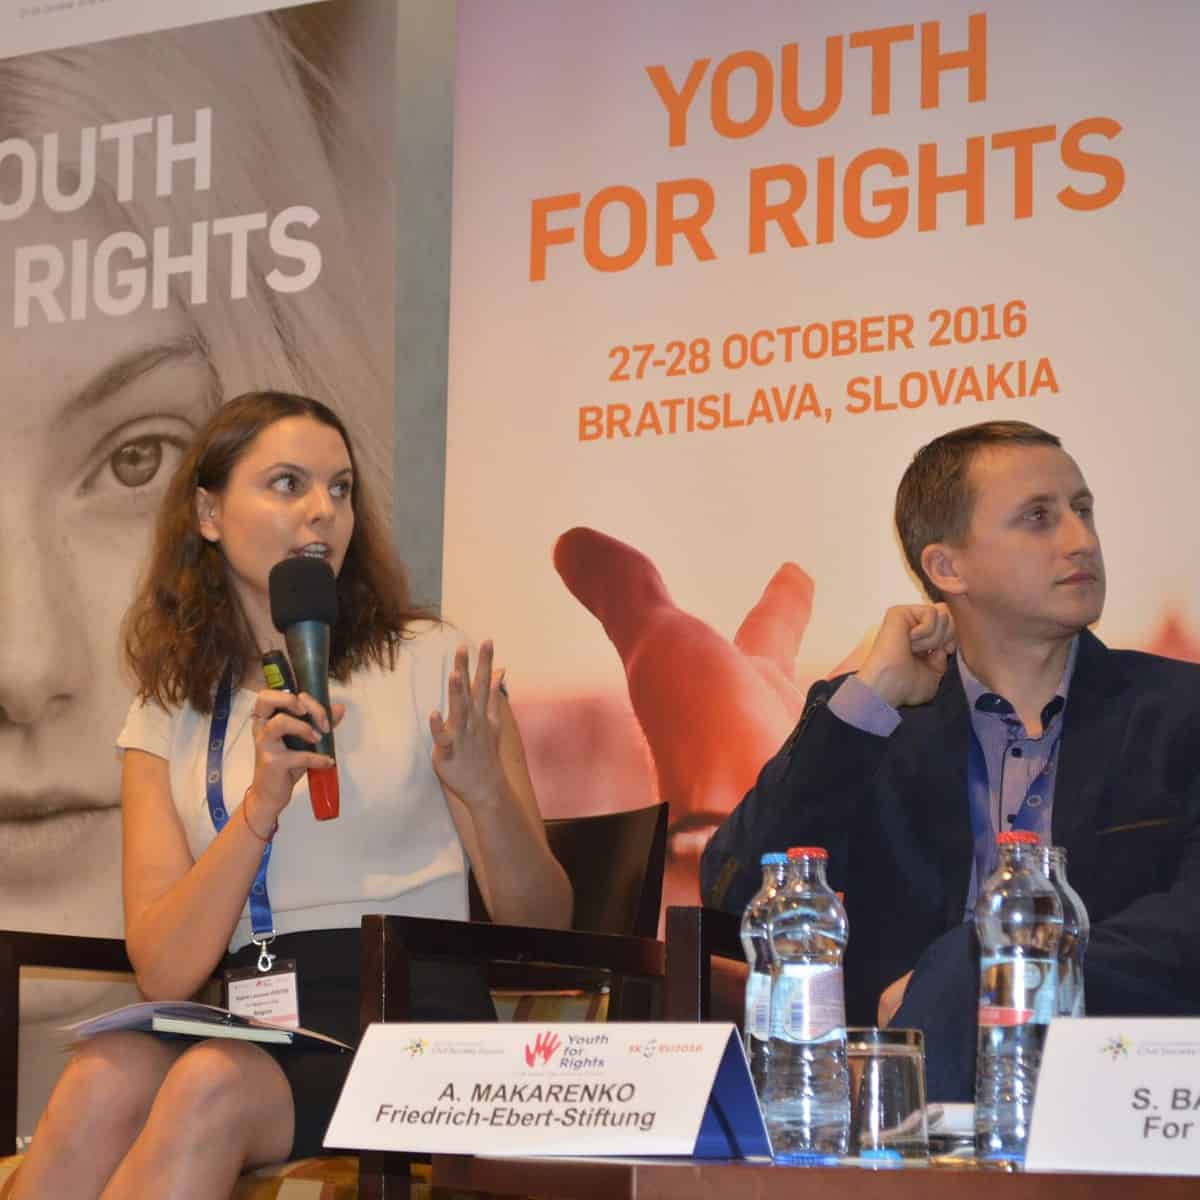 Sophie Vériter speaking at the Conference Youth for Rights in Slovakia